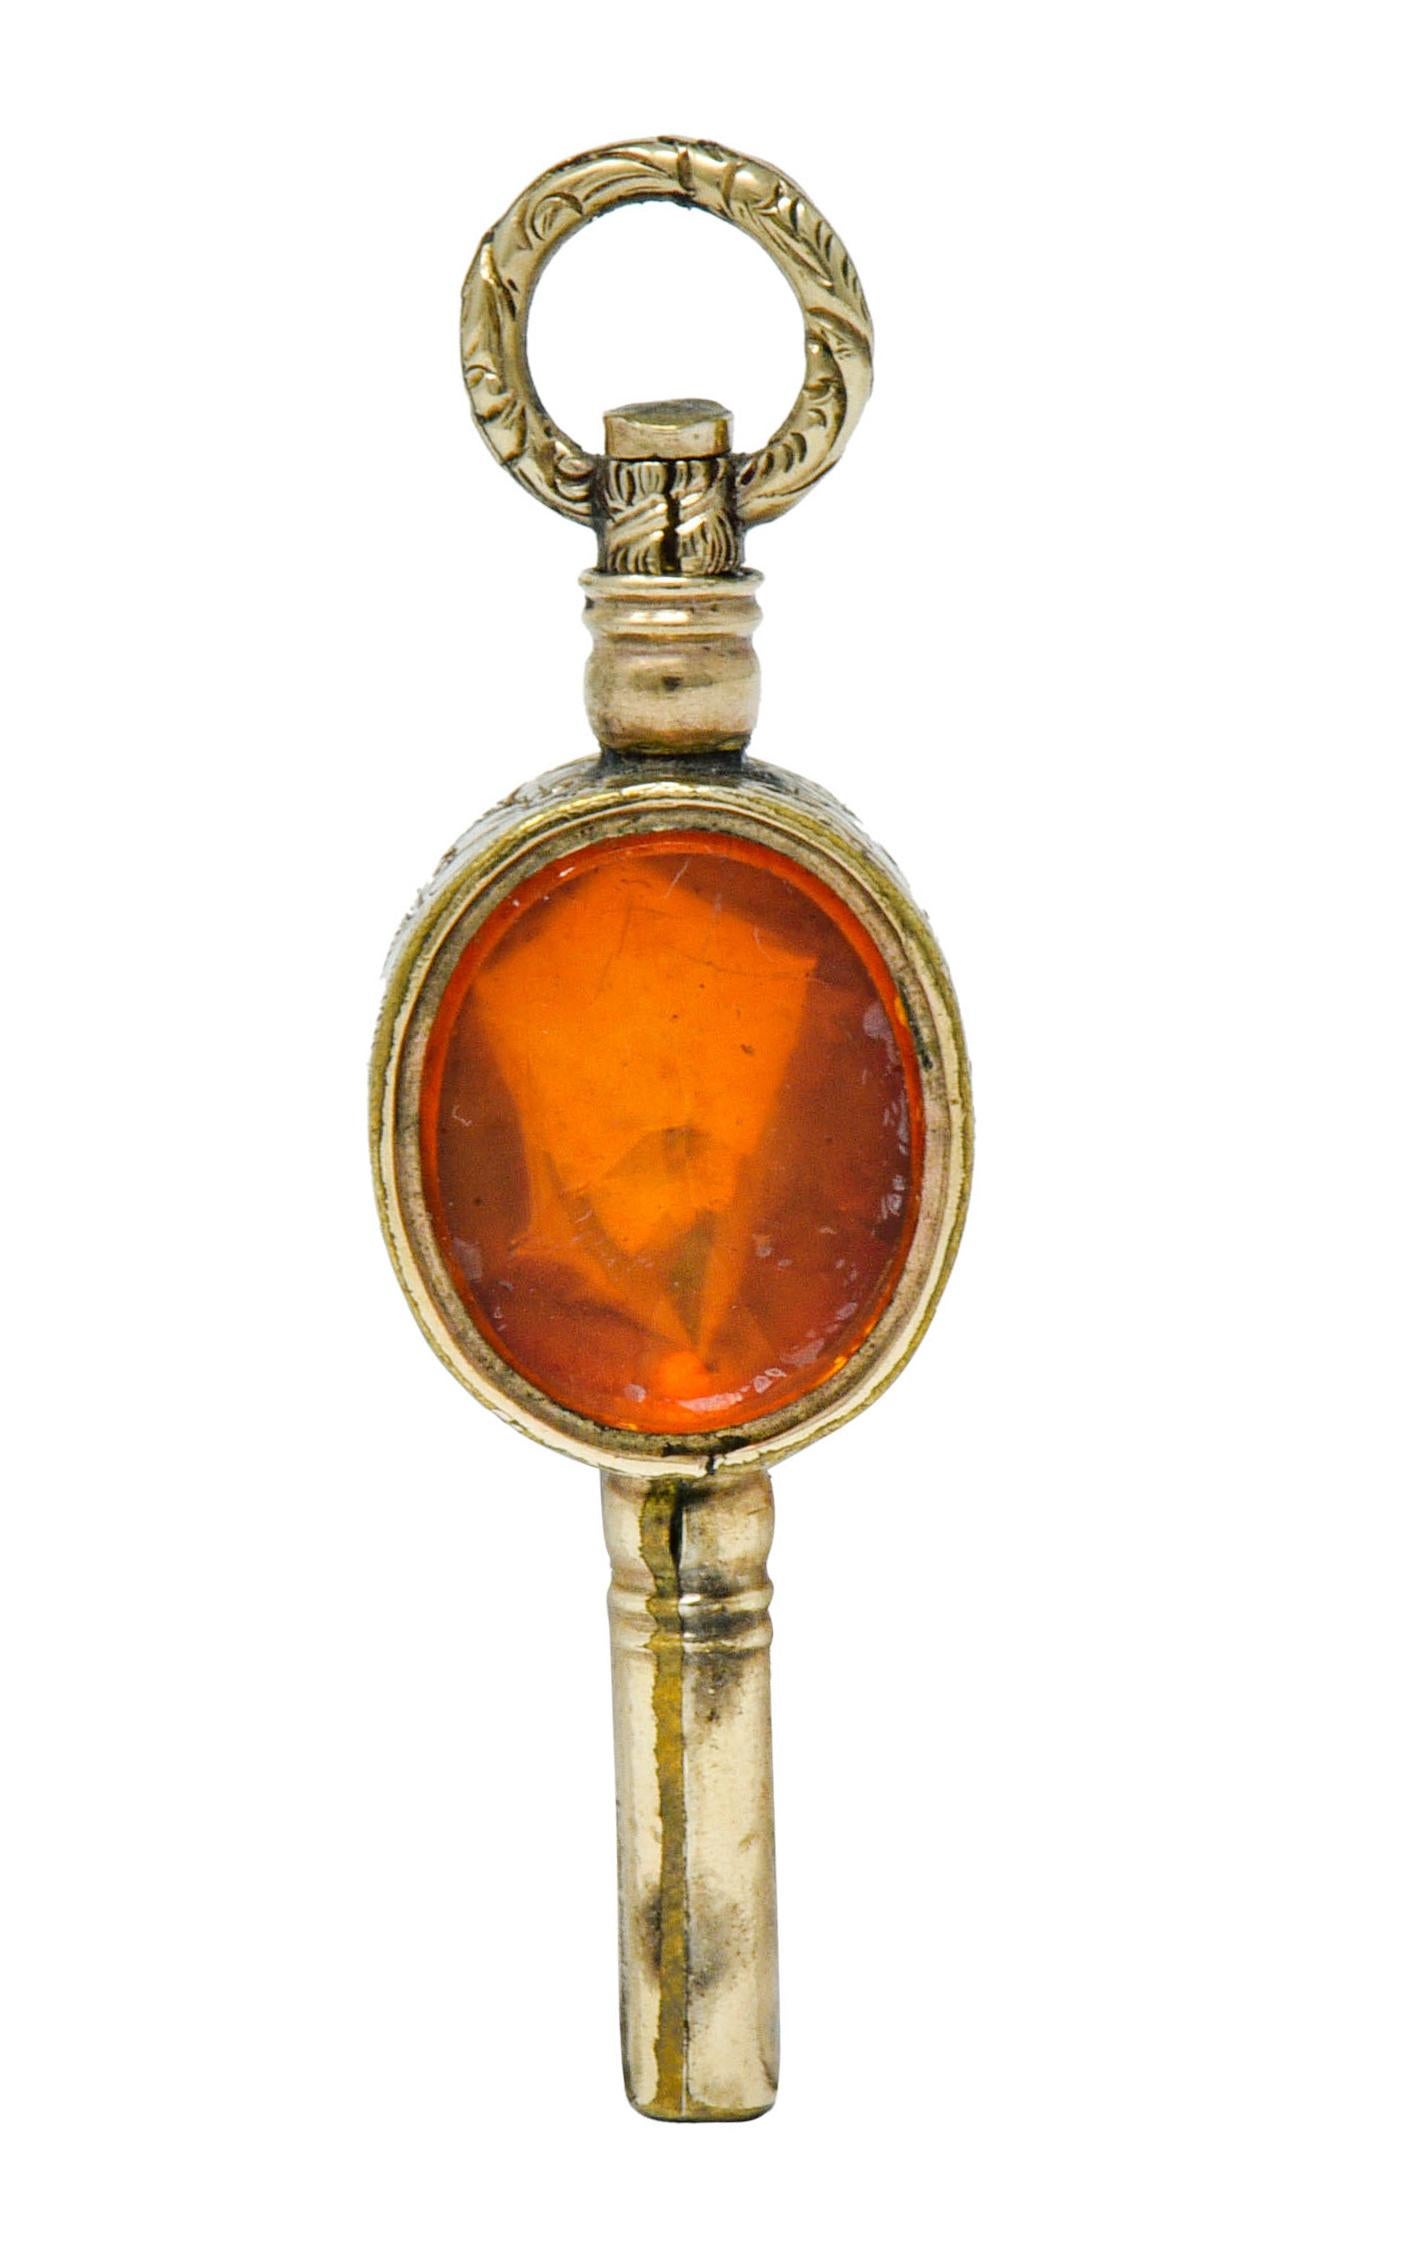 Pendant charm is a fob inspired watch key designed as a cylindrical tube centering an oval form that rotates

Oval form is bezel set on both sides featuring an oval cut foil backed citrine and an oval bloodstone tablet

Citrine transparent and a